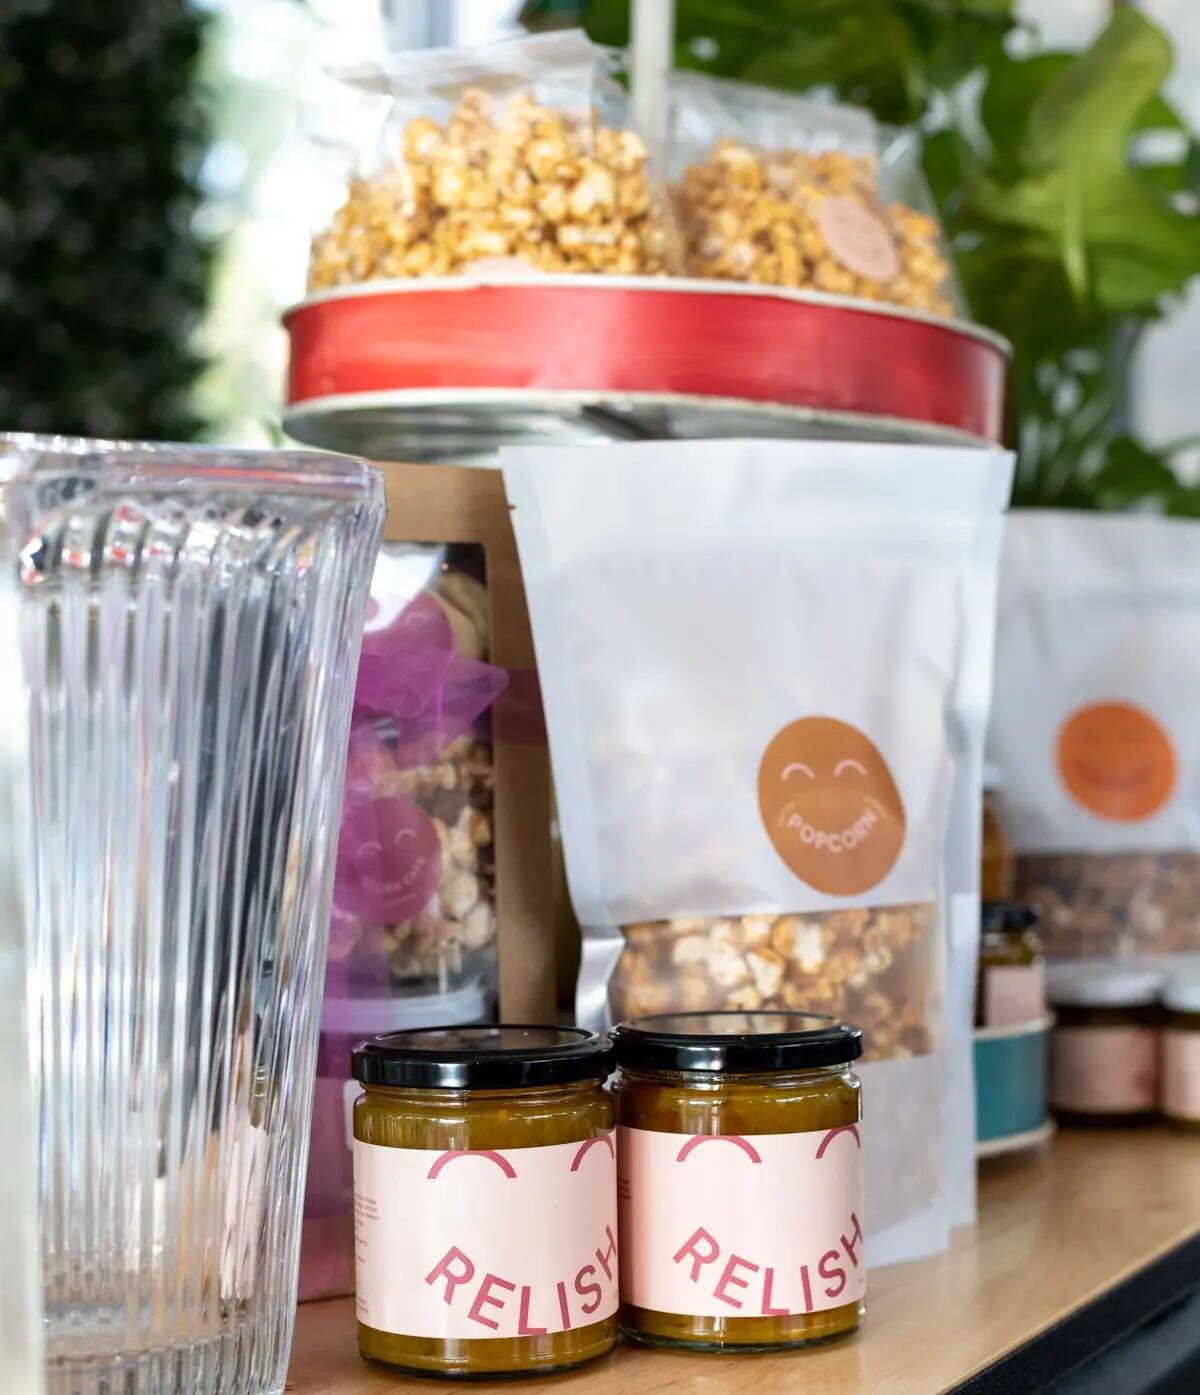 Stock your pantry of all the good things in life; you don't even need to leave home!! Jump online (www.relish-cafe.com) and order direct from us - we'll post it straight to you!! 
.
.
.
.
#muesli #housemade #madeinhouse #madewithlove #tasmania #tasty